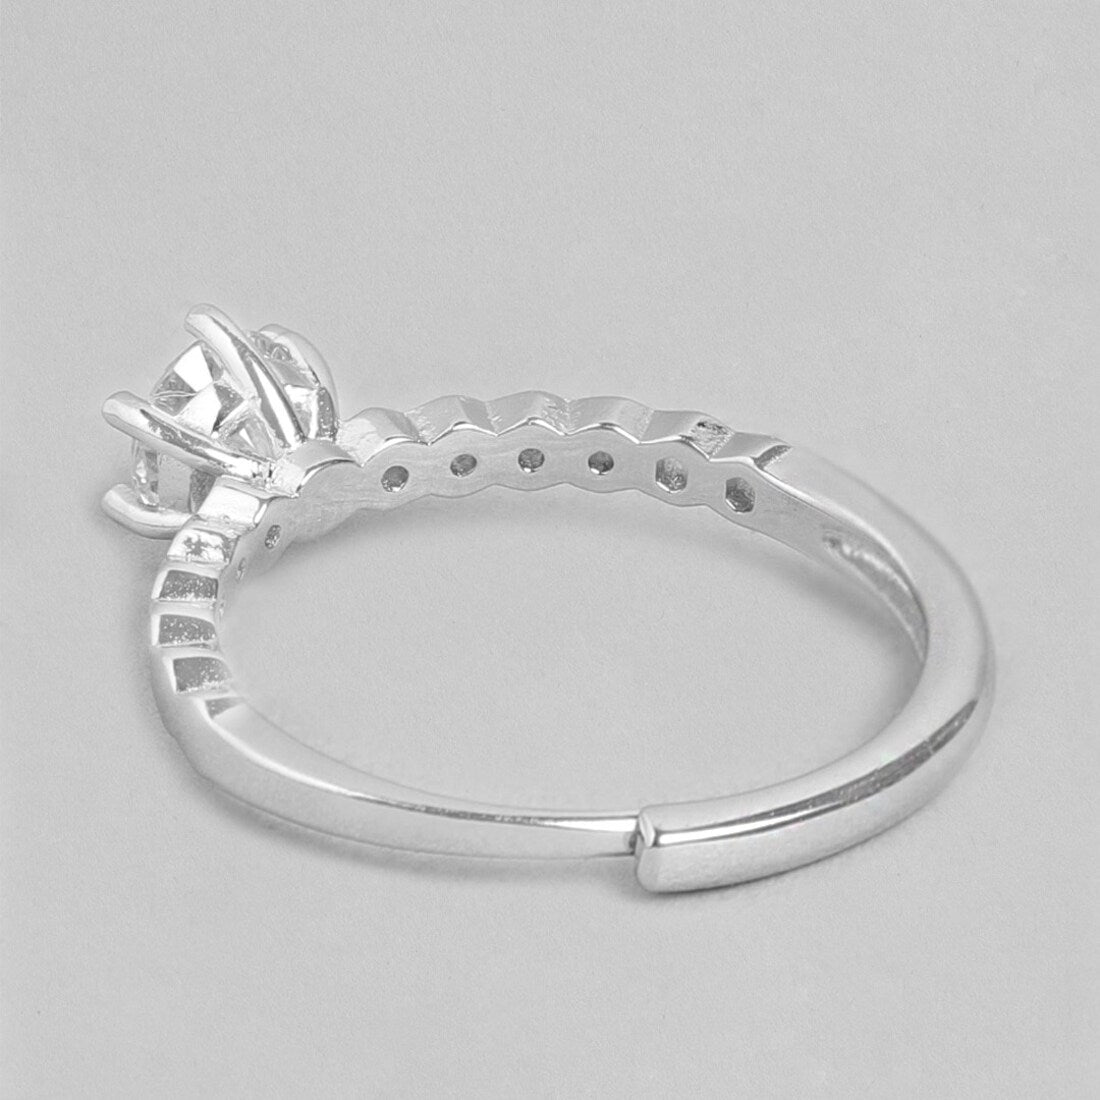 The Princess Solitaire 925 Silver Ring (Adjustable)